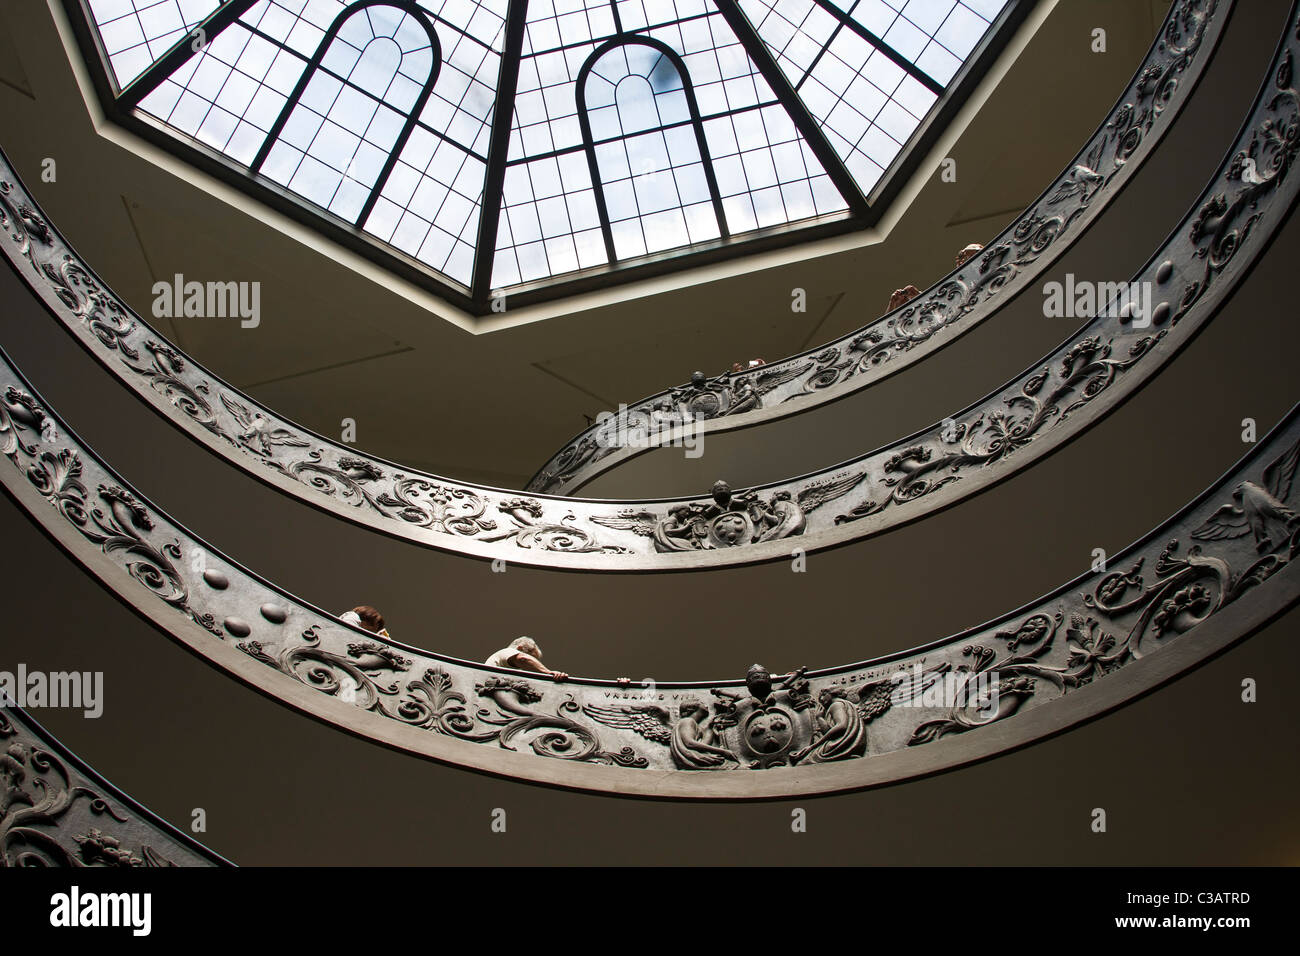 Detail of the famous spiral stairway at the Vatican museum in Rome Italy Stock Photo